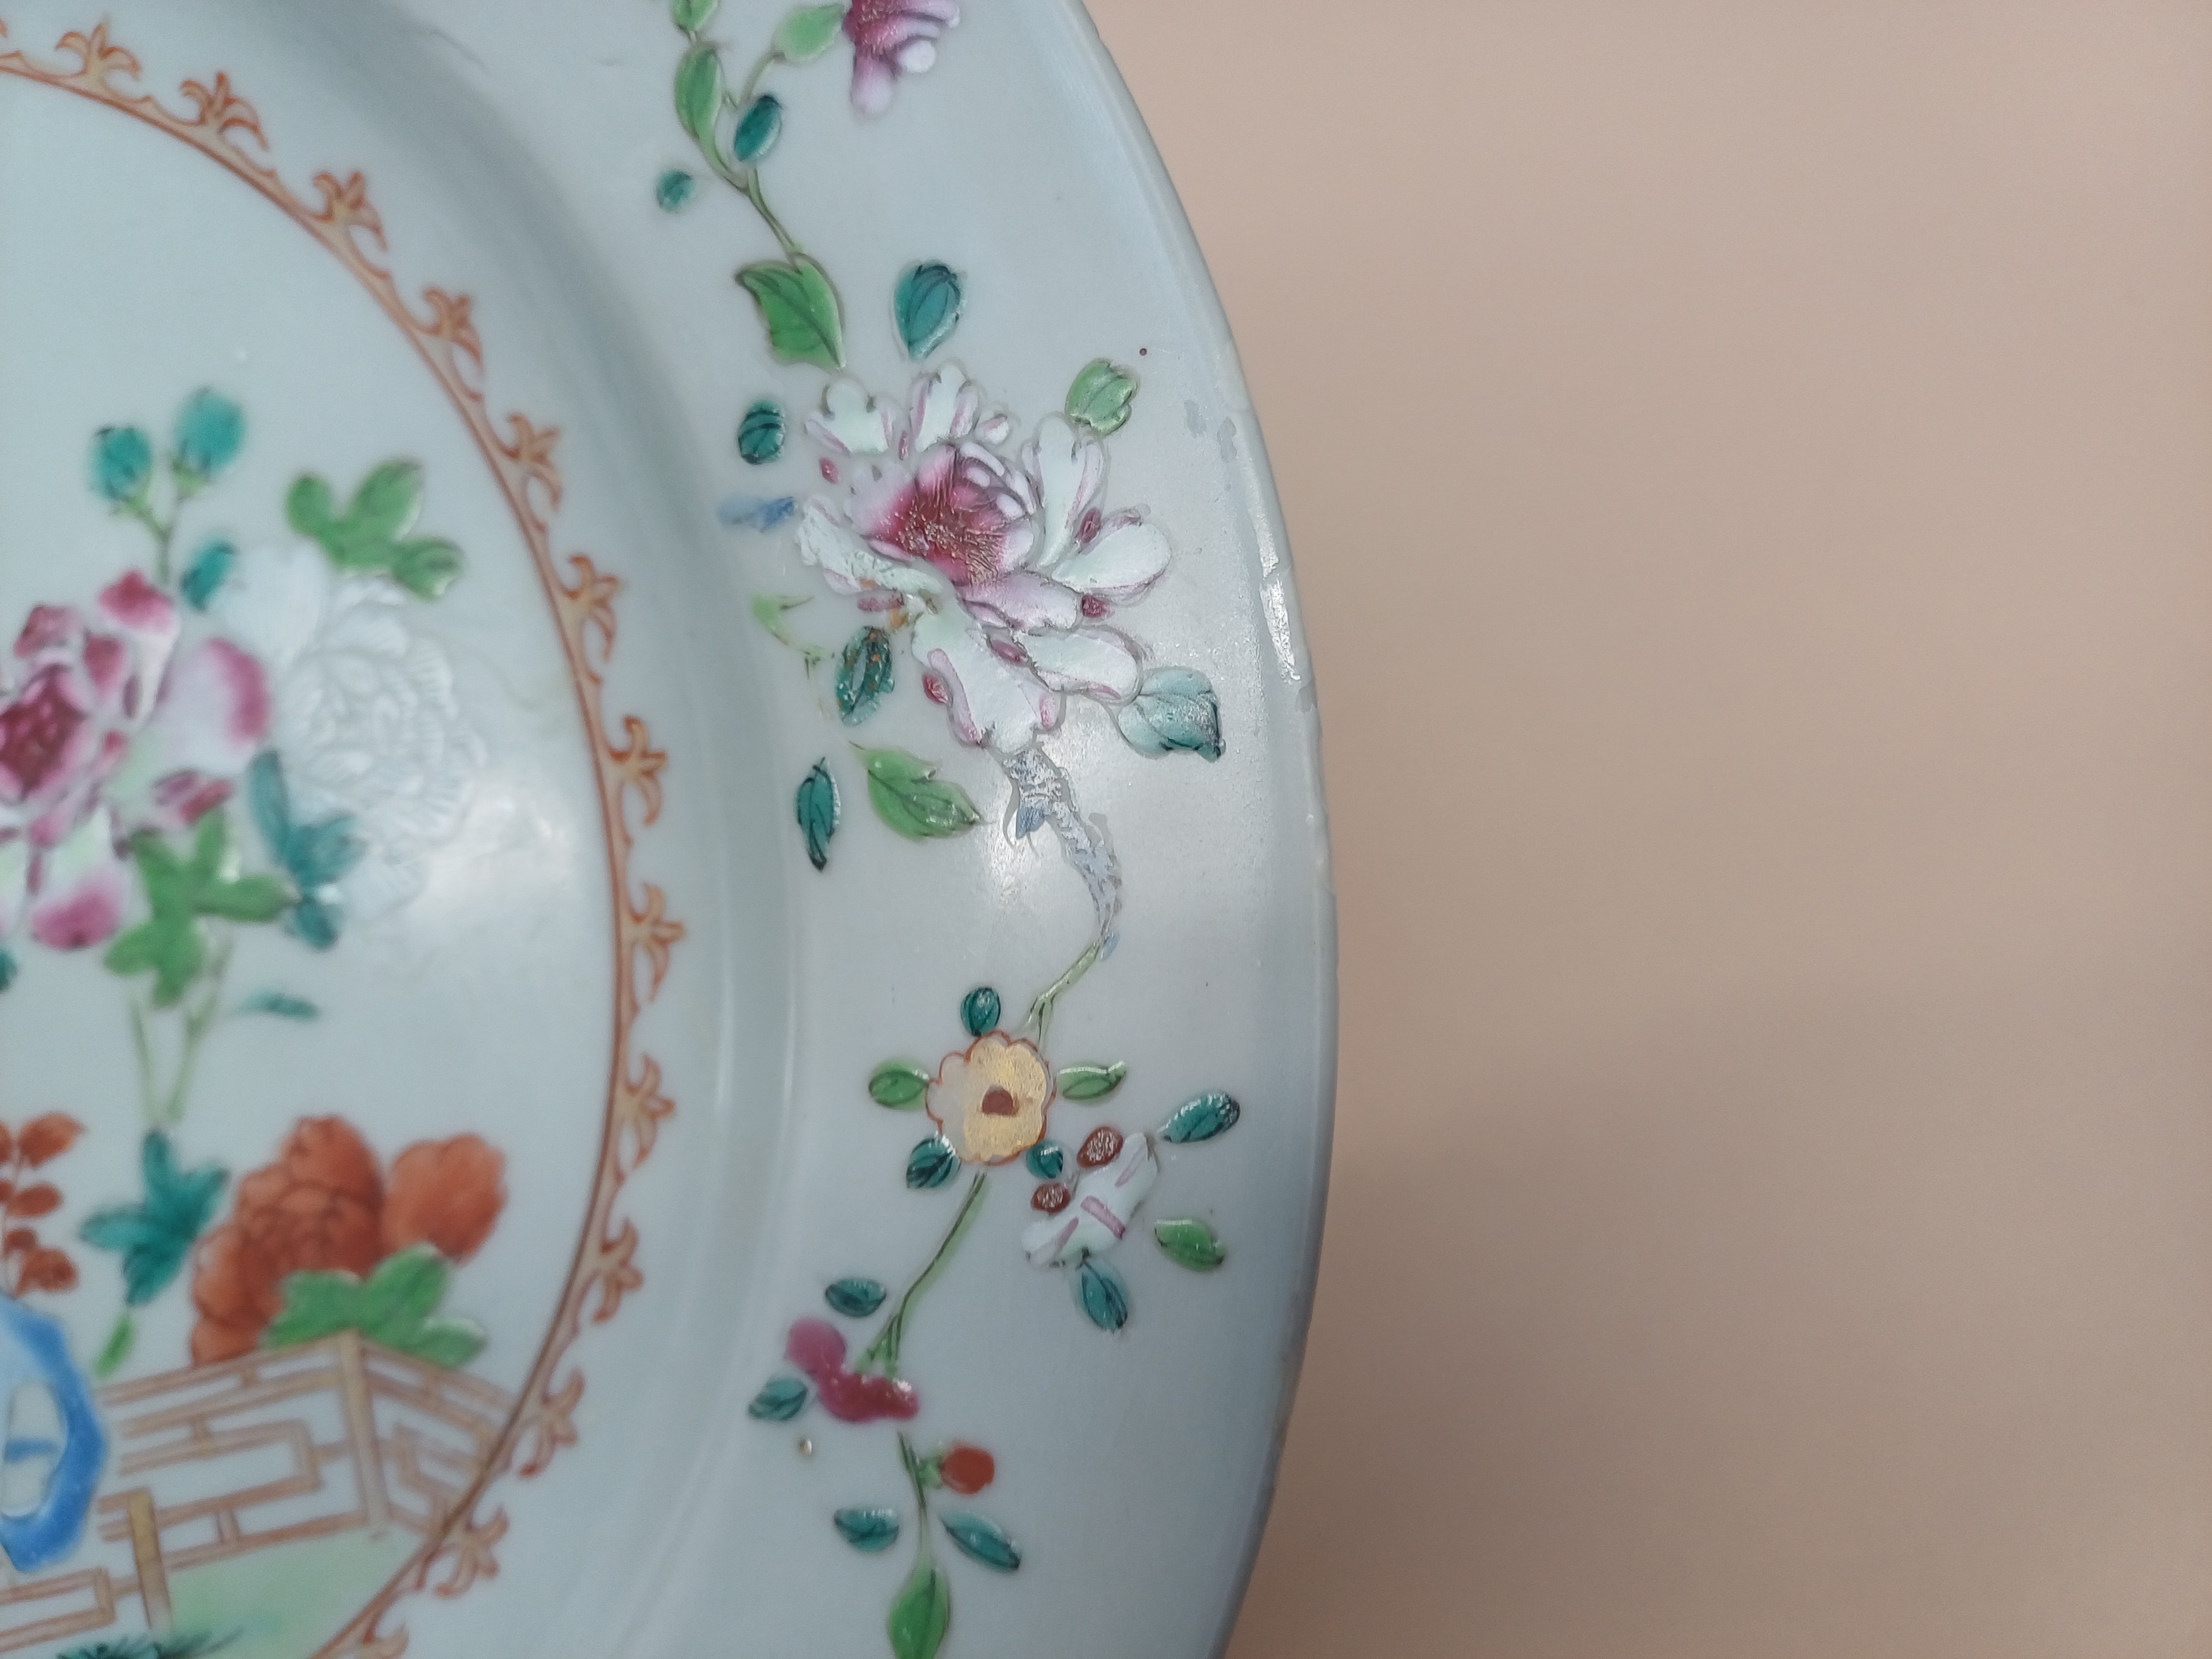 TWO CHINESE EXPORT FAMILLE-ROSE 'CRANES AND BLOSSOMS' DISHES 清十八世紀 外銷粉彩牡丹鶴紋盤兩件 - Image 5 of 15